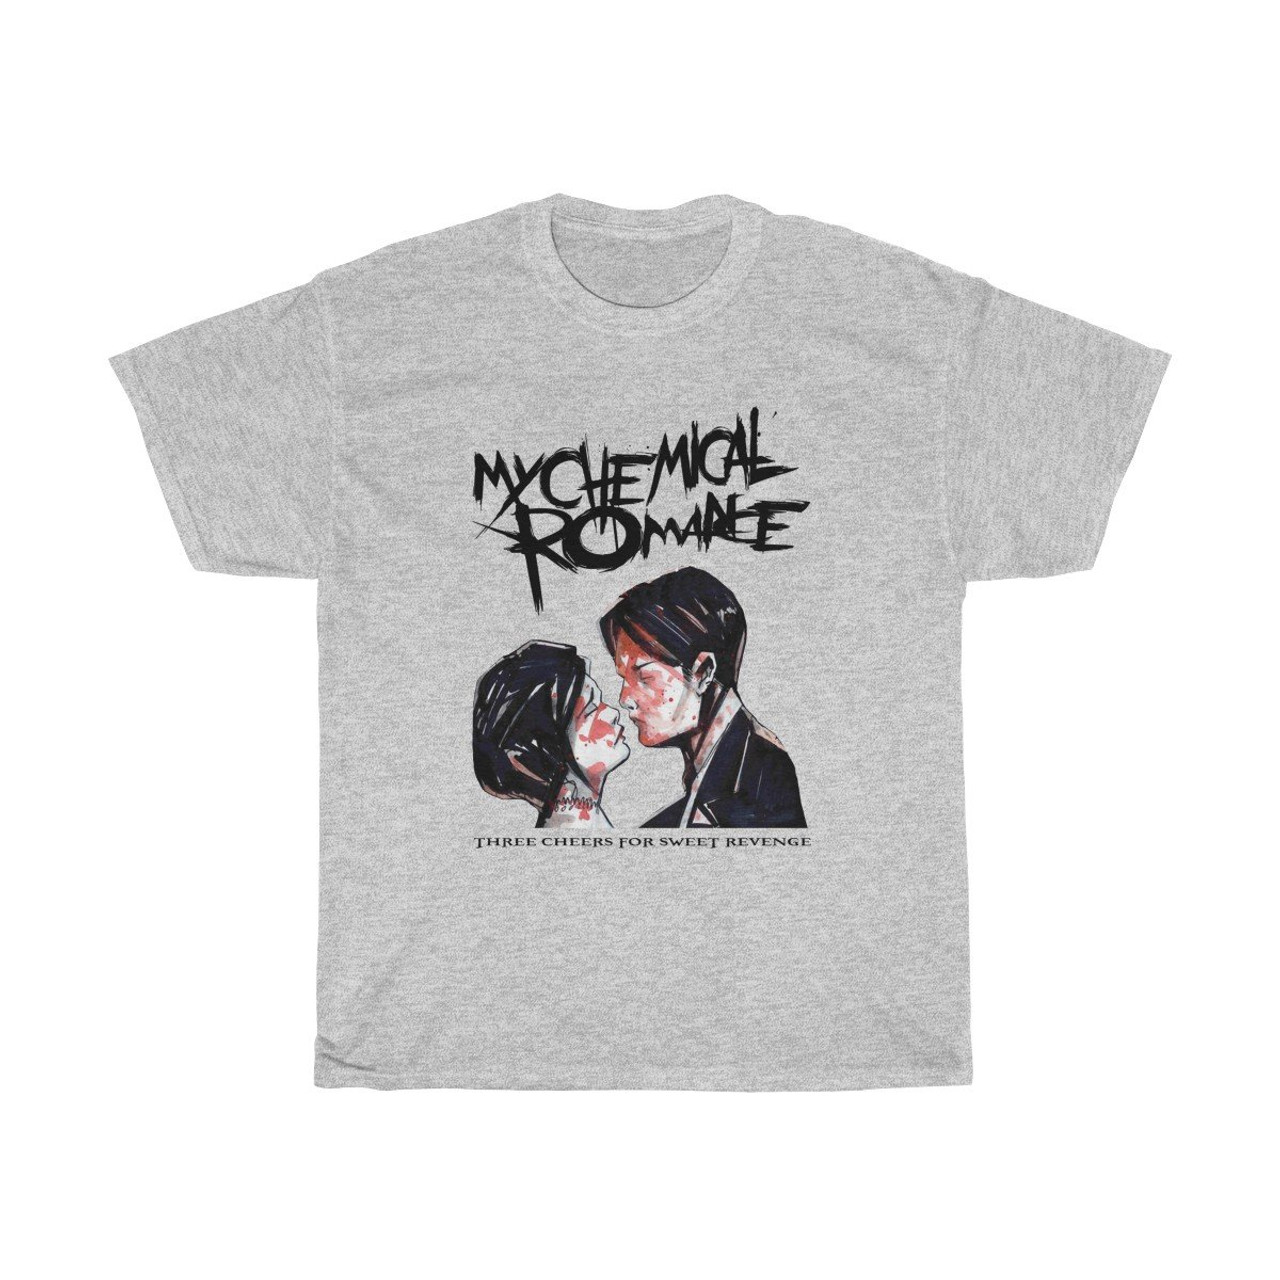 Sudden descent Chairman budget My Chemical Romance Three Cheers For Sweet Revenge Man's T-Shirt Tee